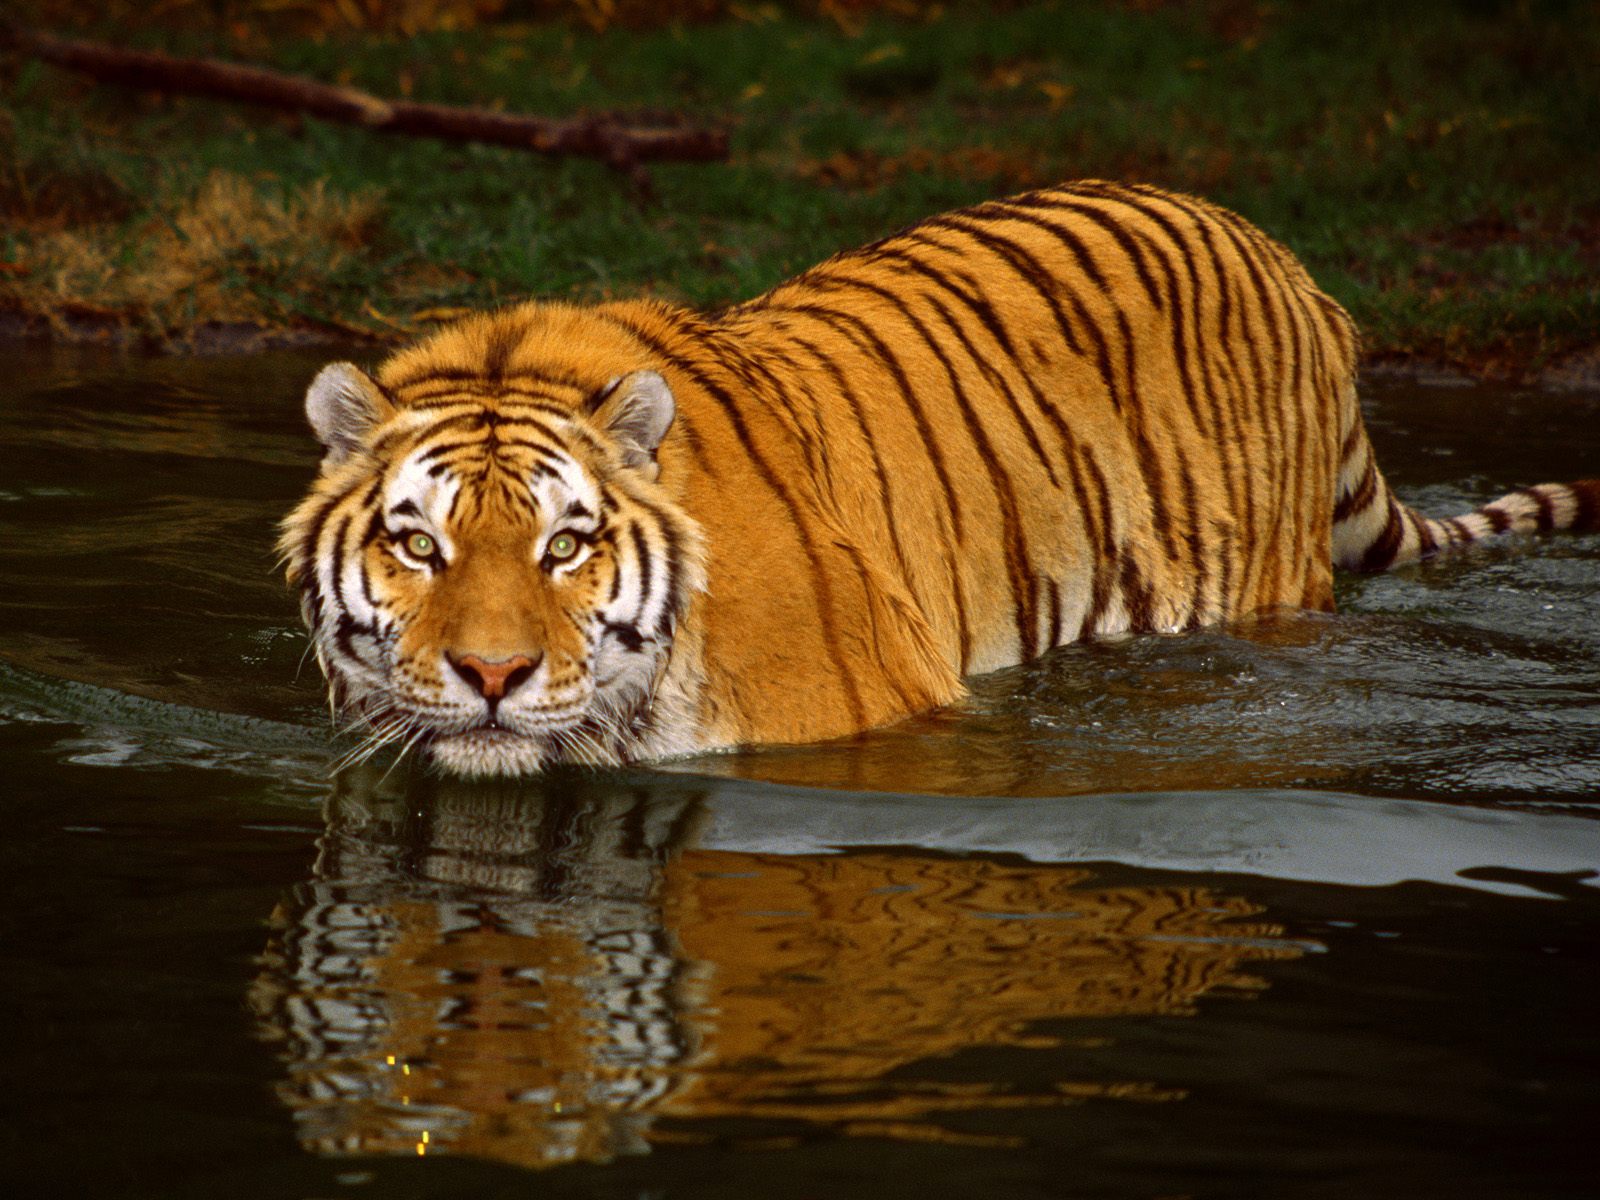 http://4.bp.blogspot.com/-VnVZITDvmfY/T2BG7UHly7I/AAAAAAAACqU/xDshGEAoLm8/s1600/Tiger+Full+HD+Wallpapers+2.jpg